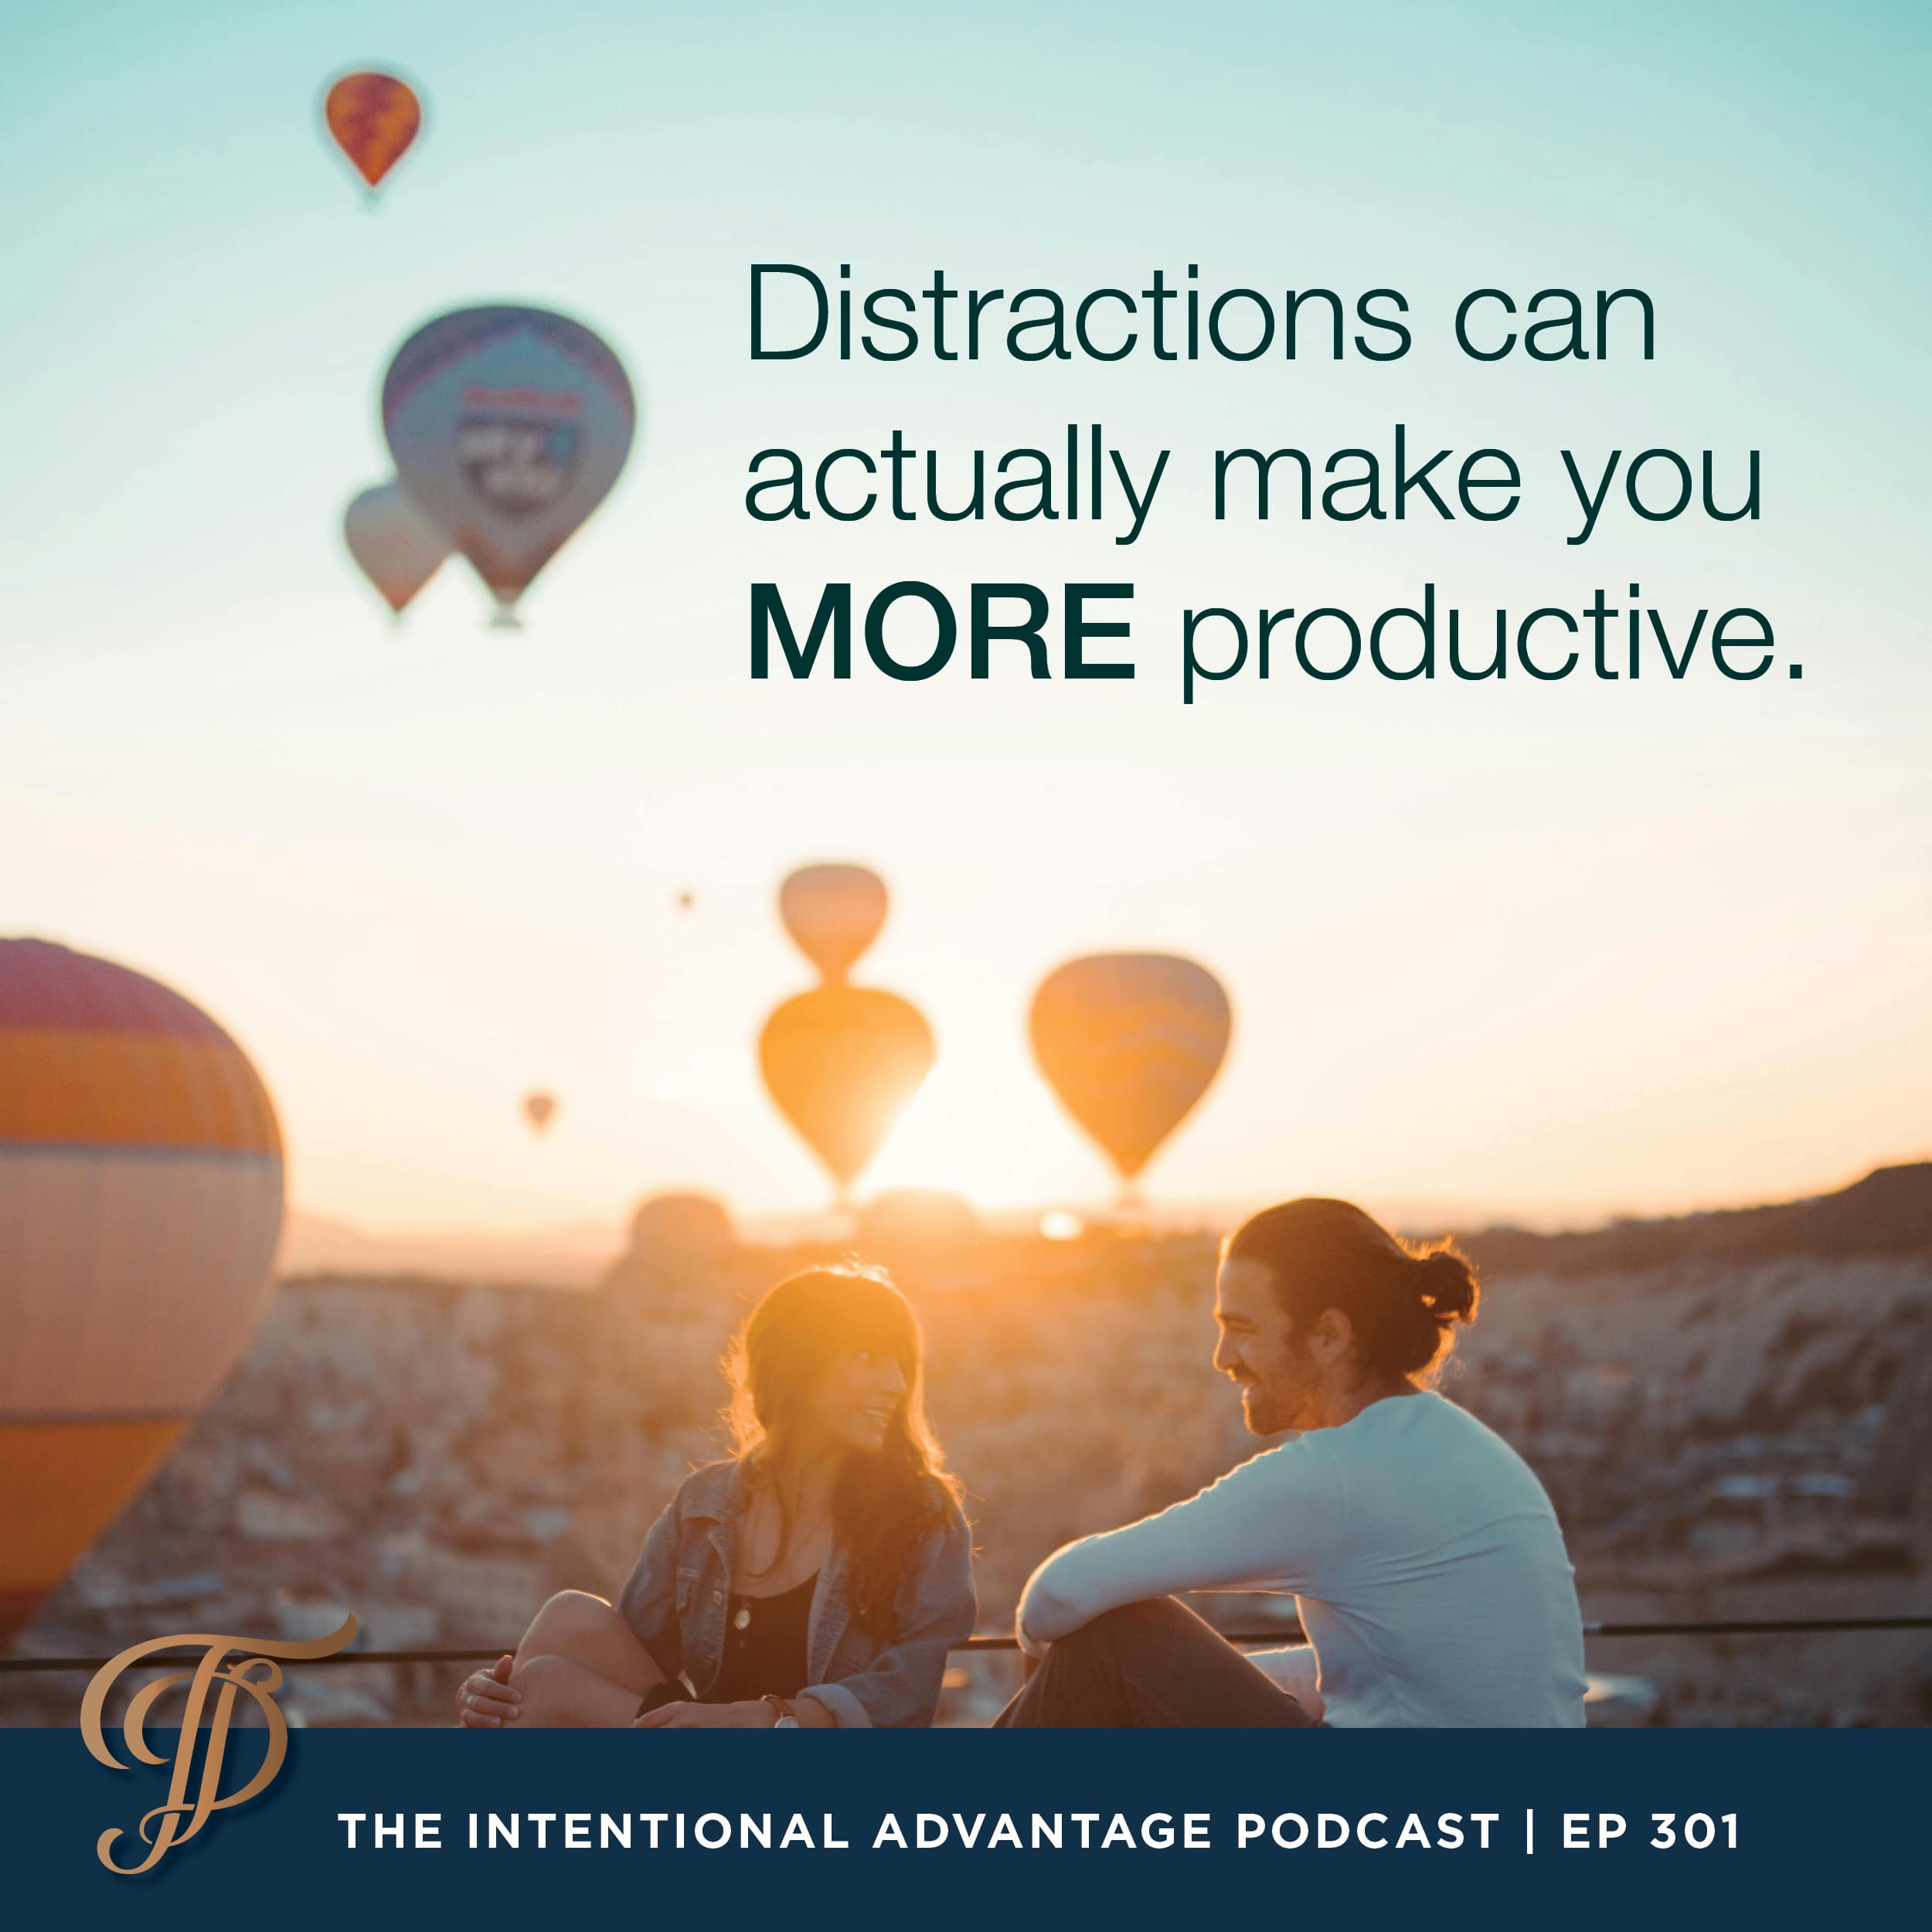 Intentional Advantage Podcast Tanya Dalton distractions can make you more productive have more time